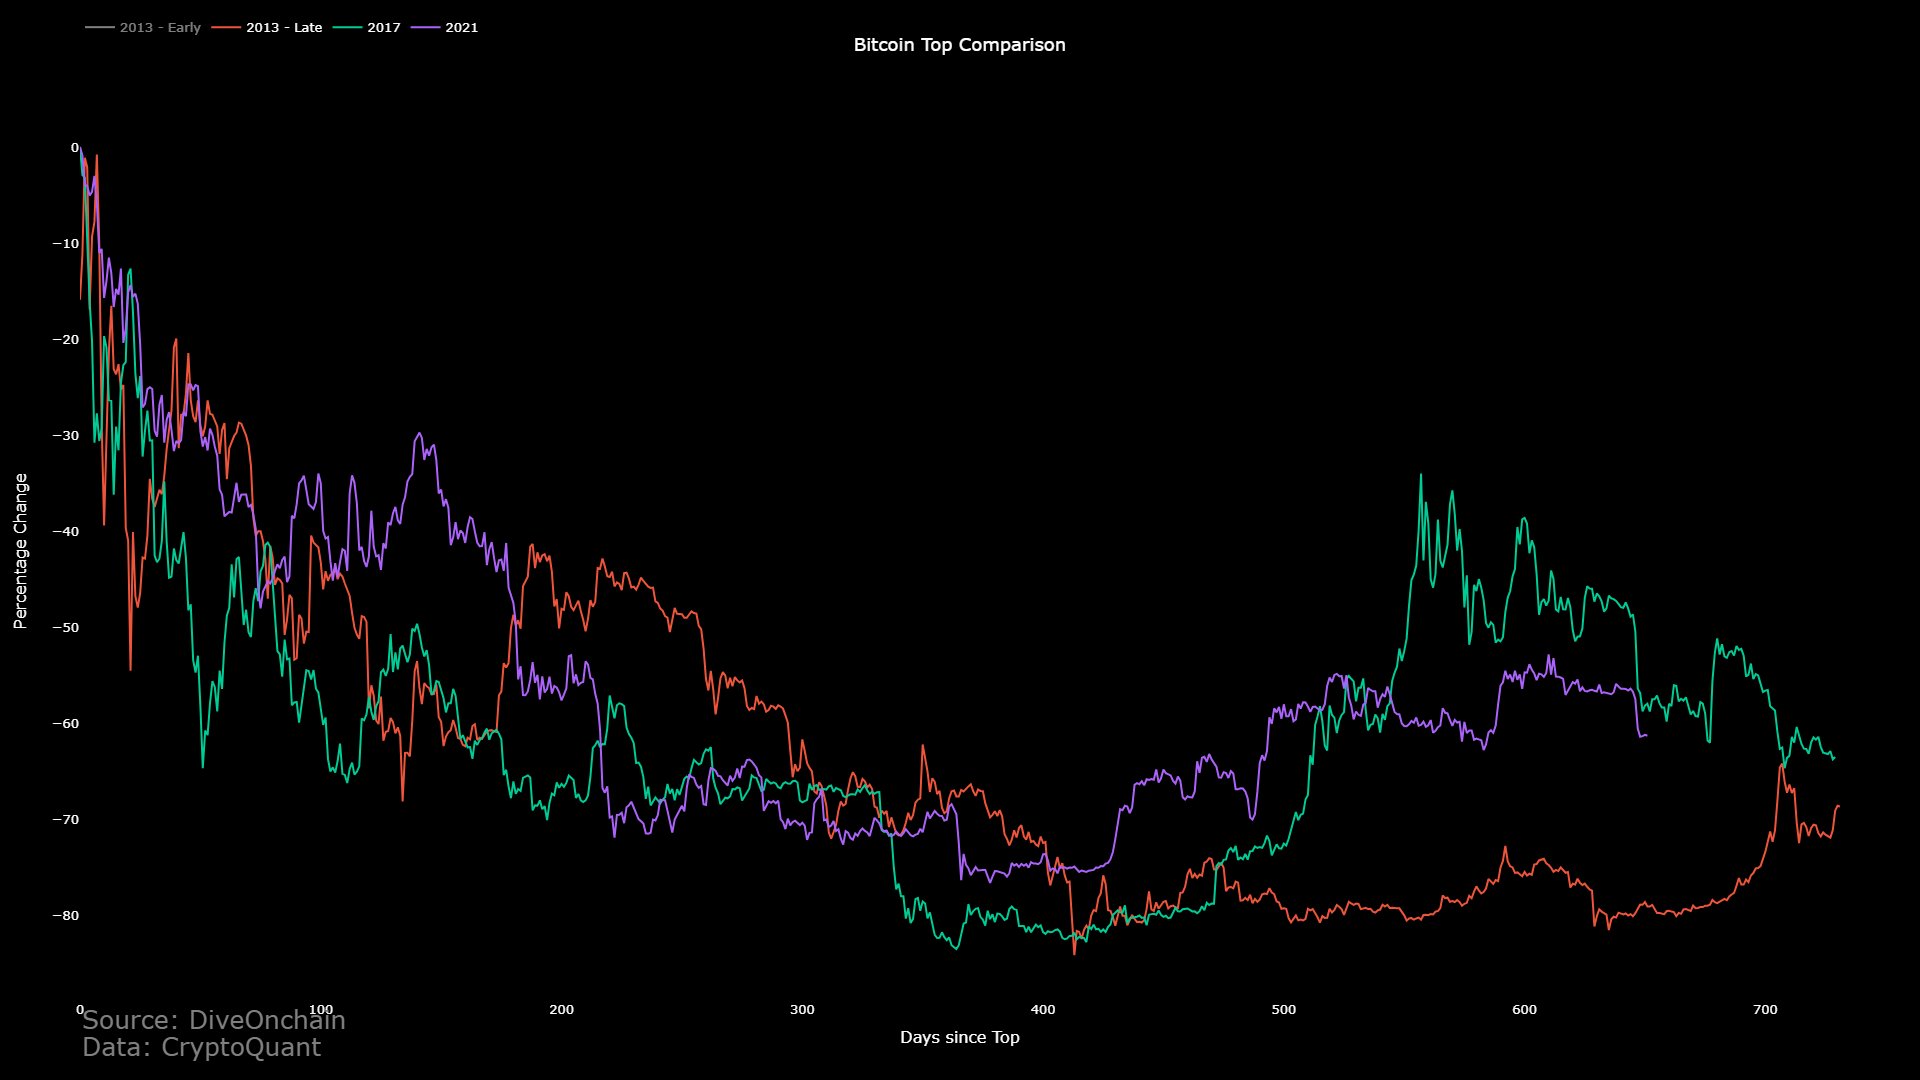  current previous bitcoin cycle cycles against price 